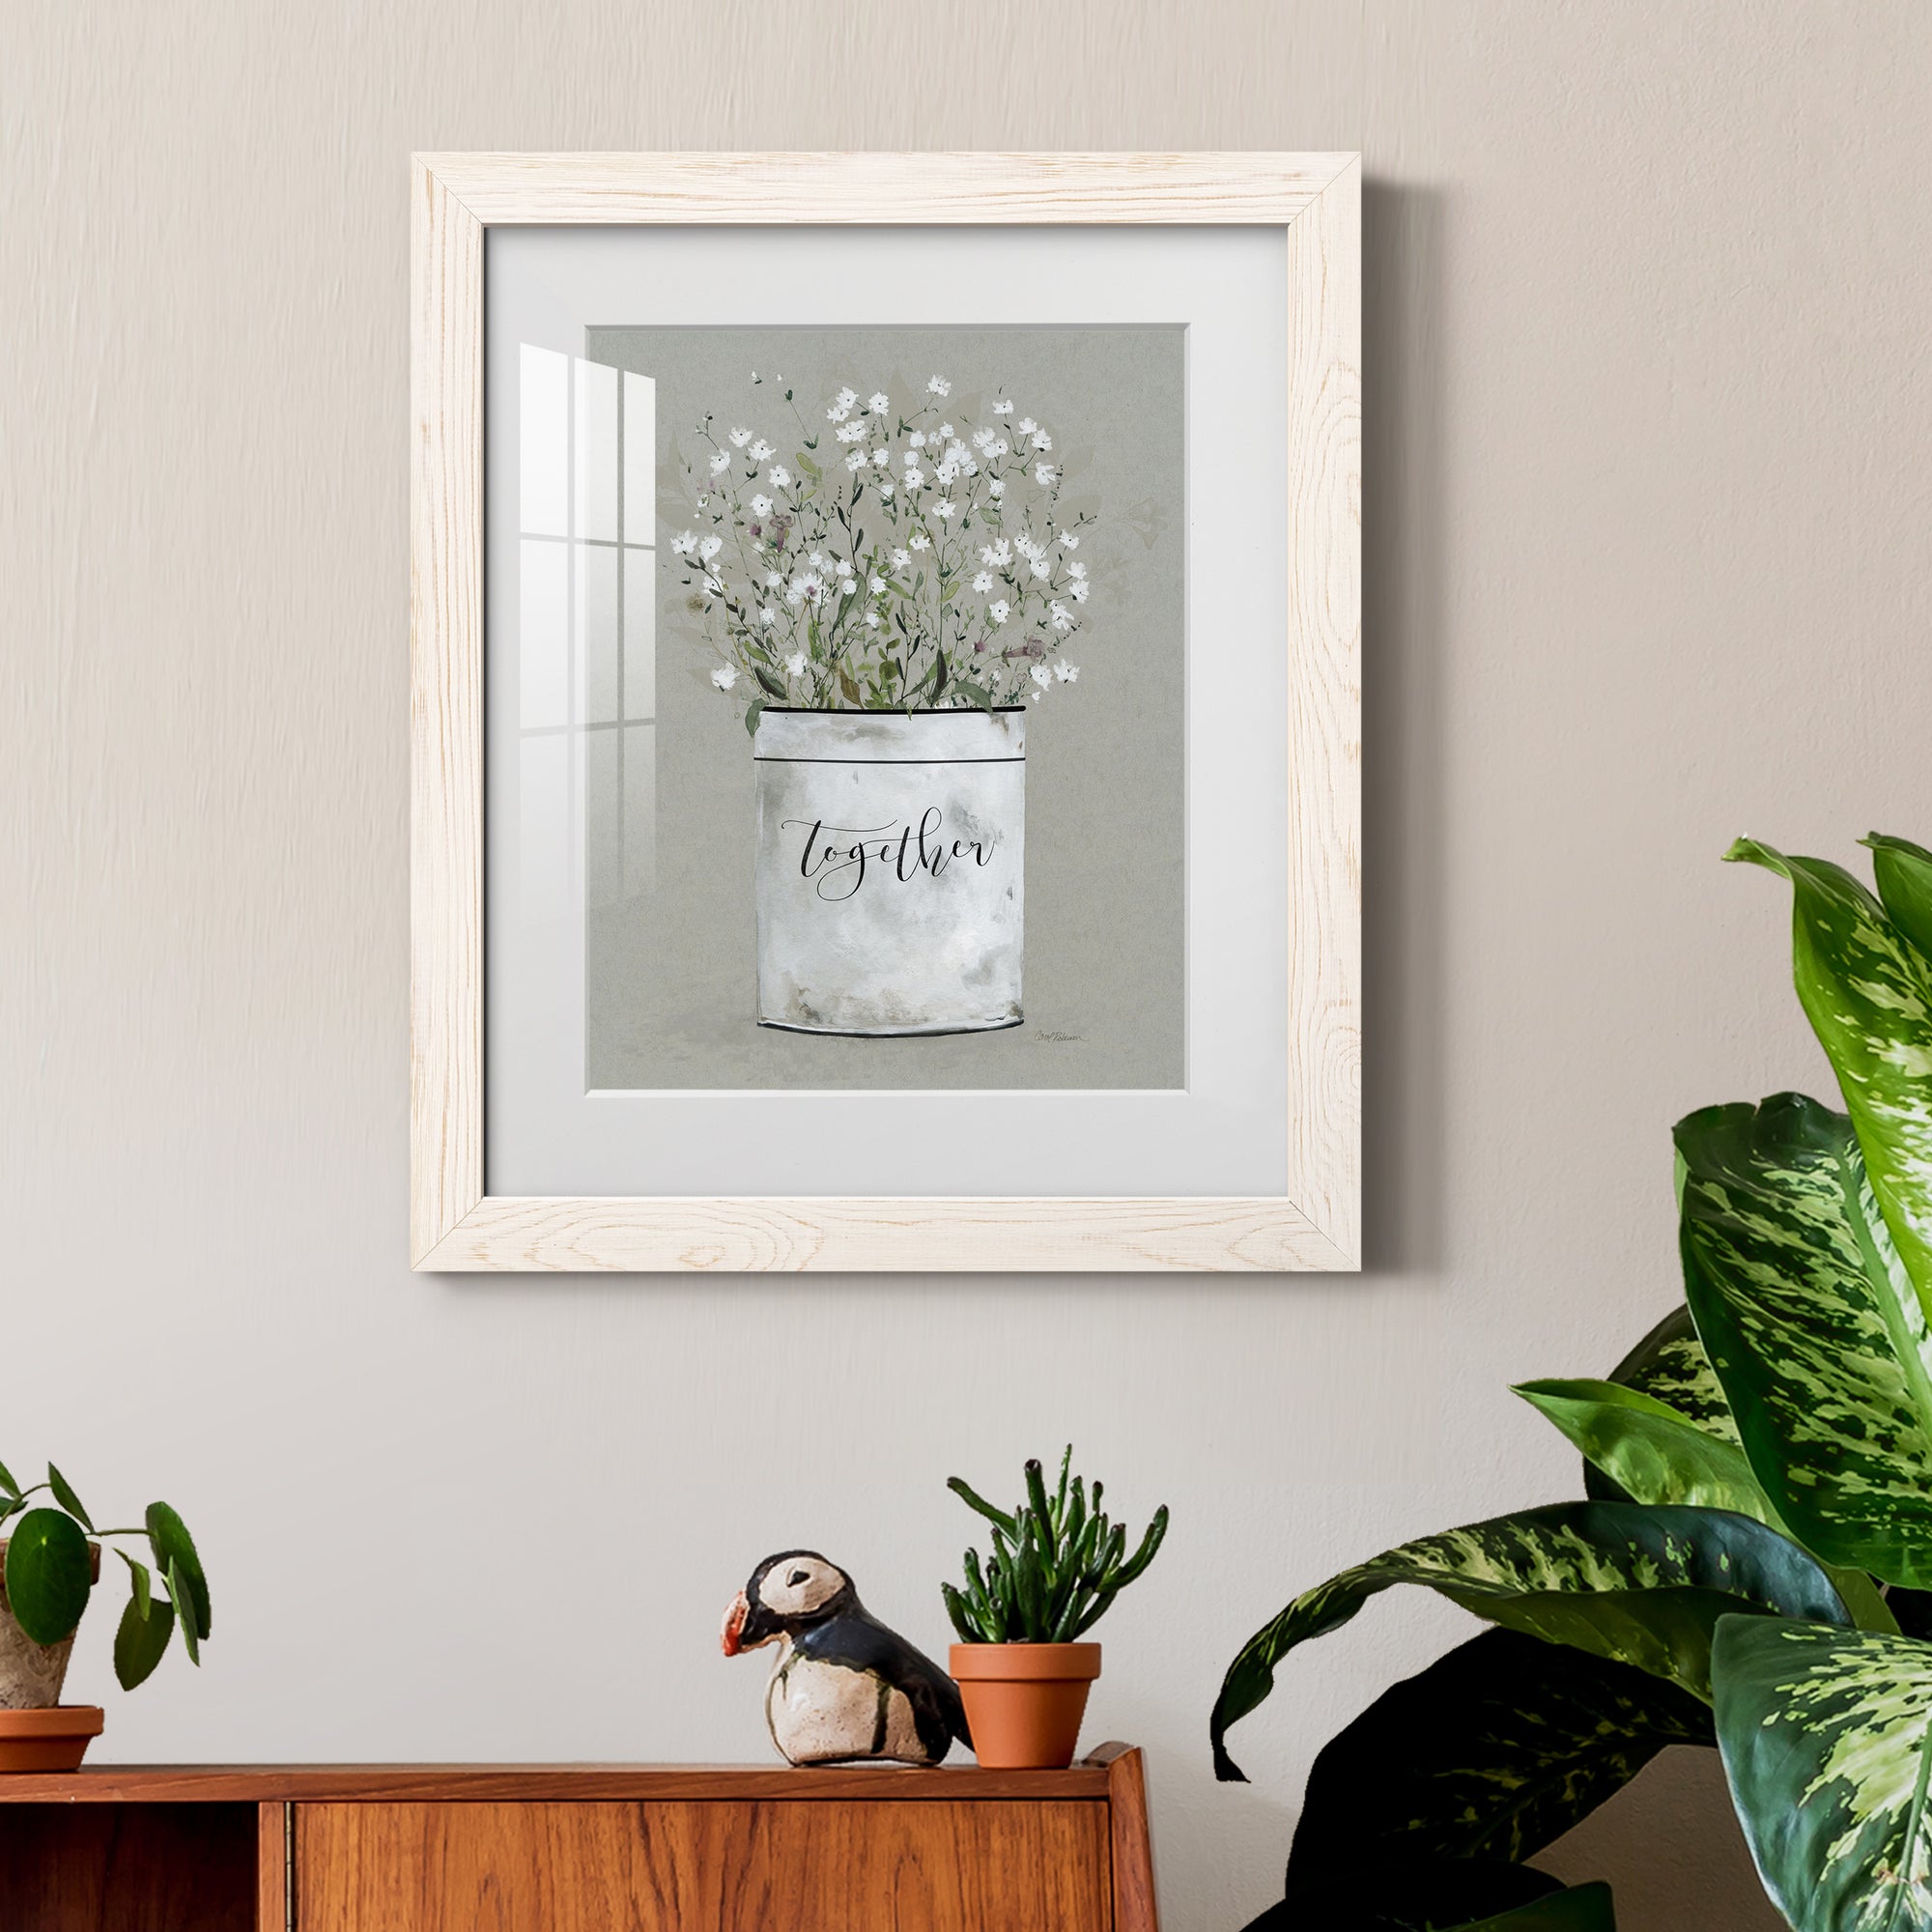 Bouquet of Grace Bucket Together - Premium Framed Print - Distressed Barnwood Frame - Ready to Hang